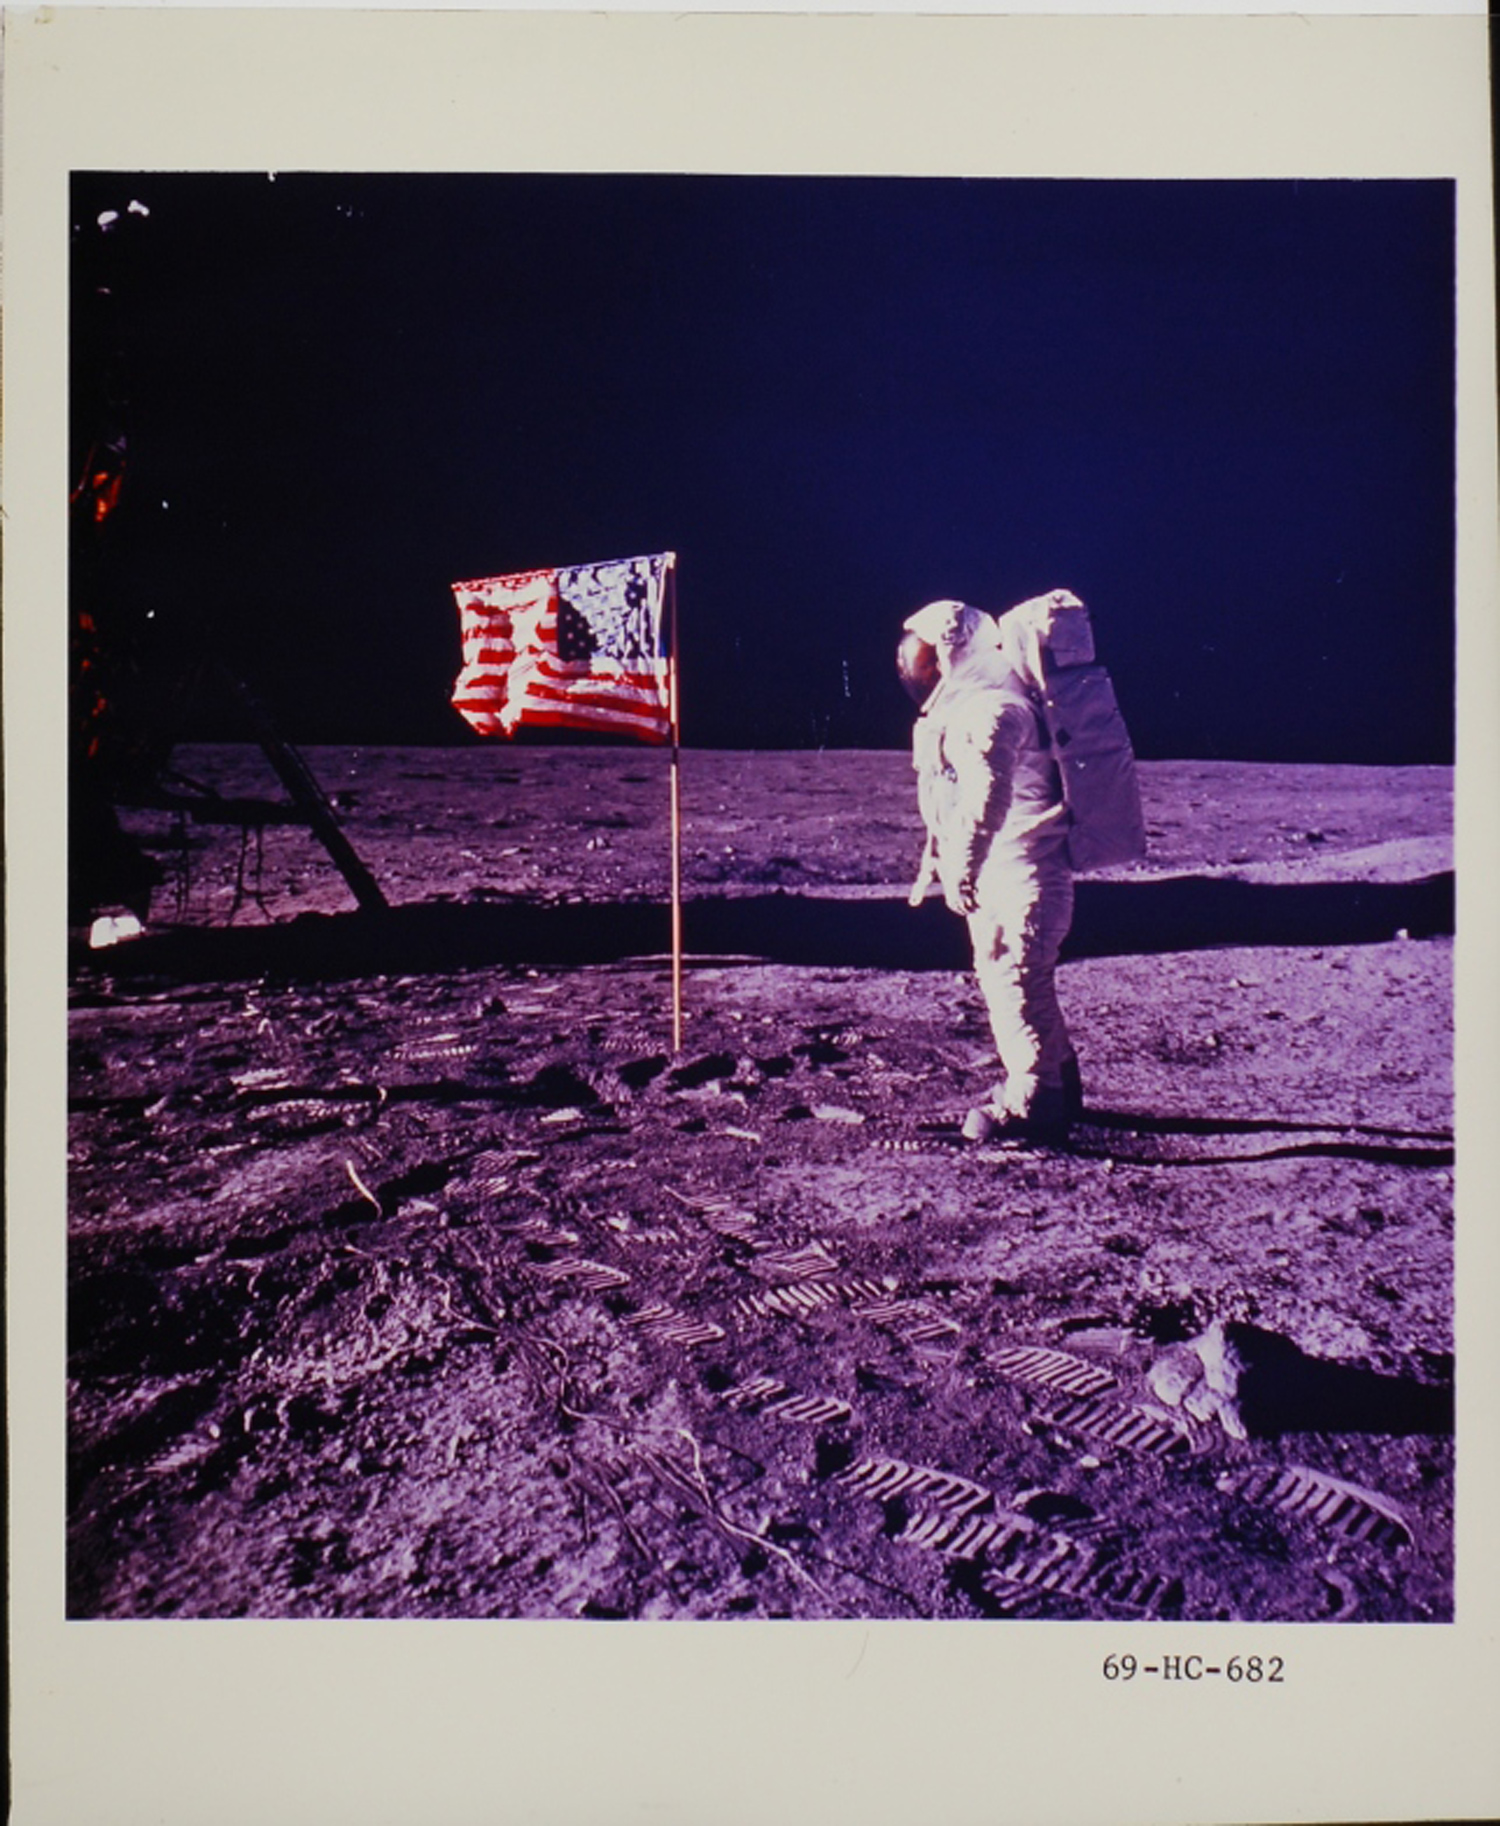 Buzz Aldrin on the moon, photographed by Neil Armstrong, July 1969.